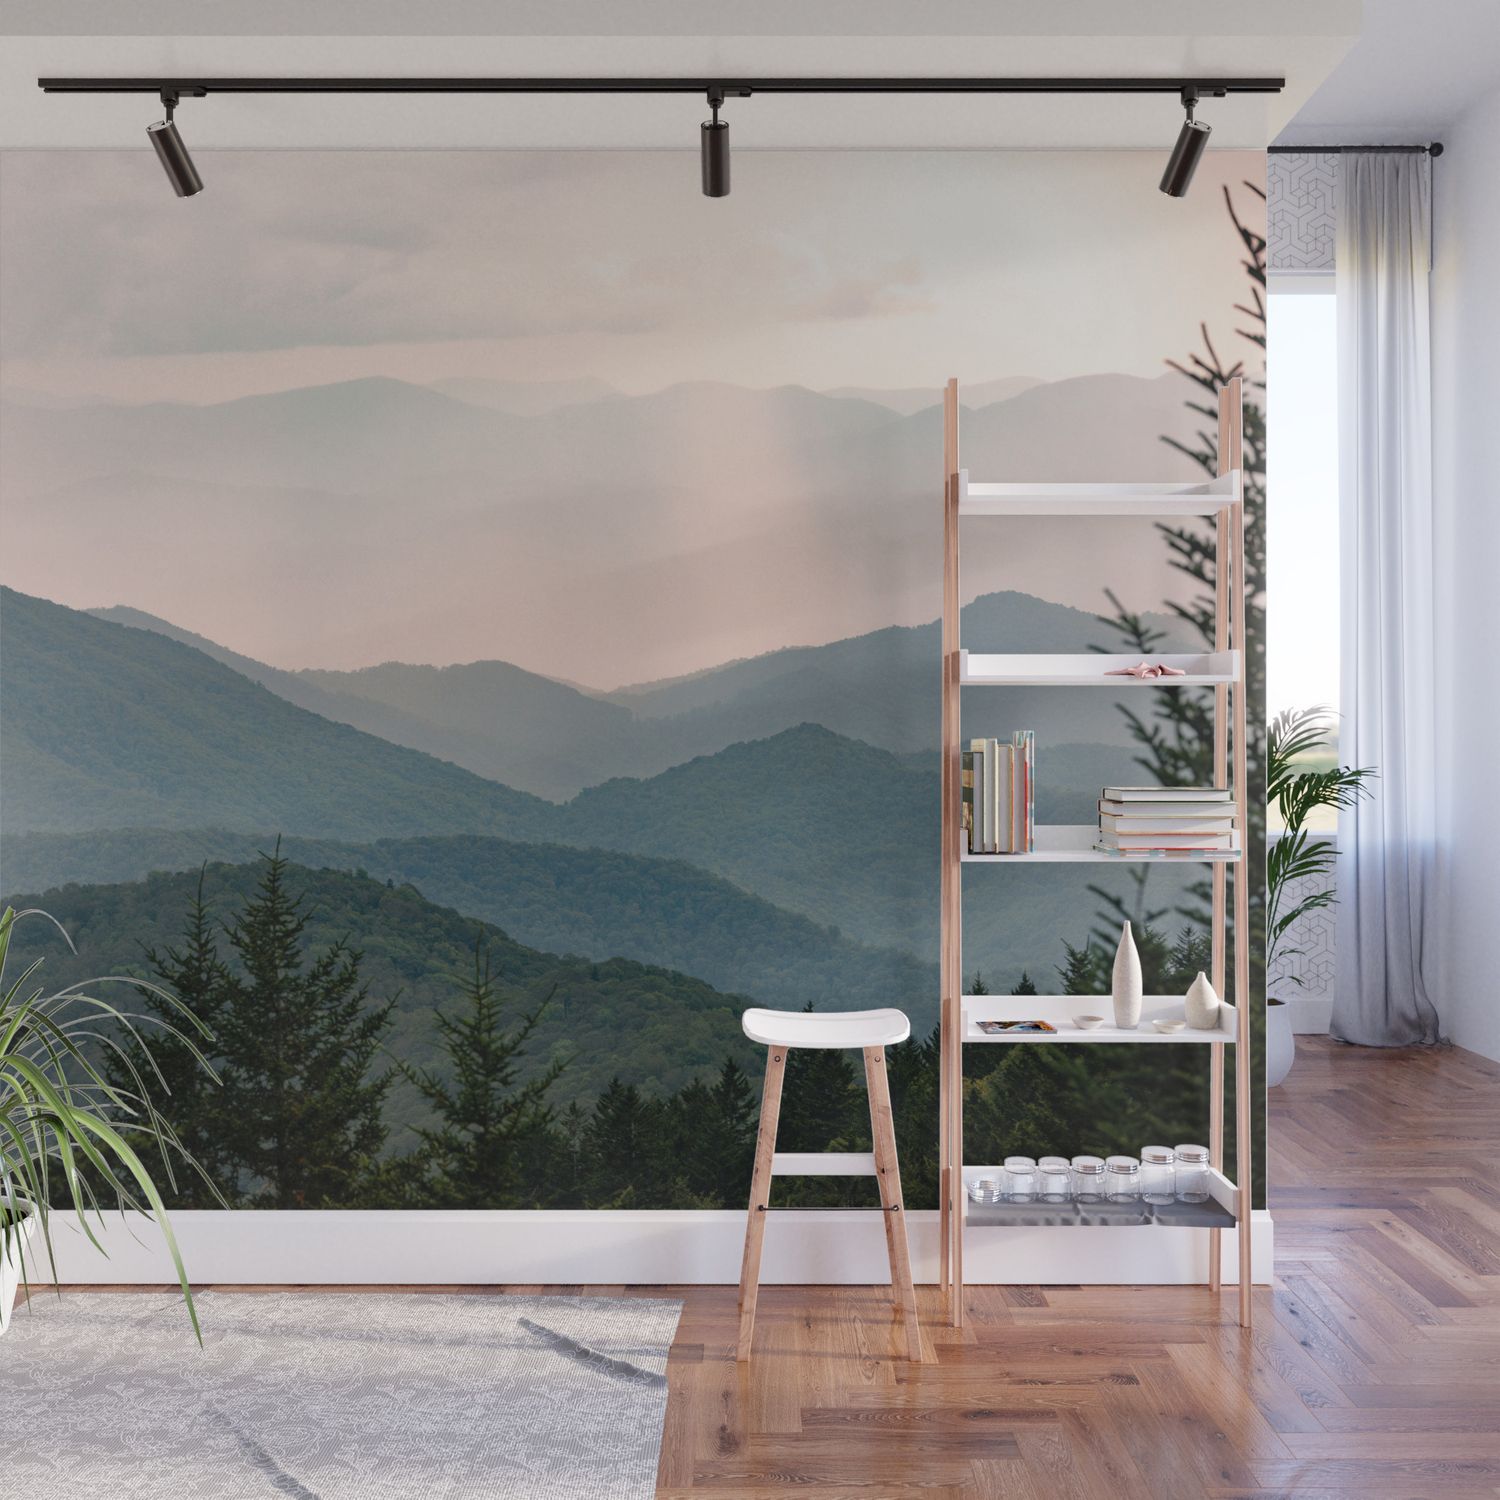 Smoky Mountain Pastel Sunset Wall Muralnature Magick Cascadia  Collection | Society6 Intended For Most Current Pastel Sunset Wall Art (View 9 of 20)